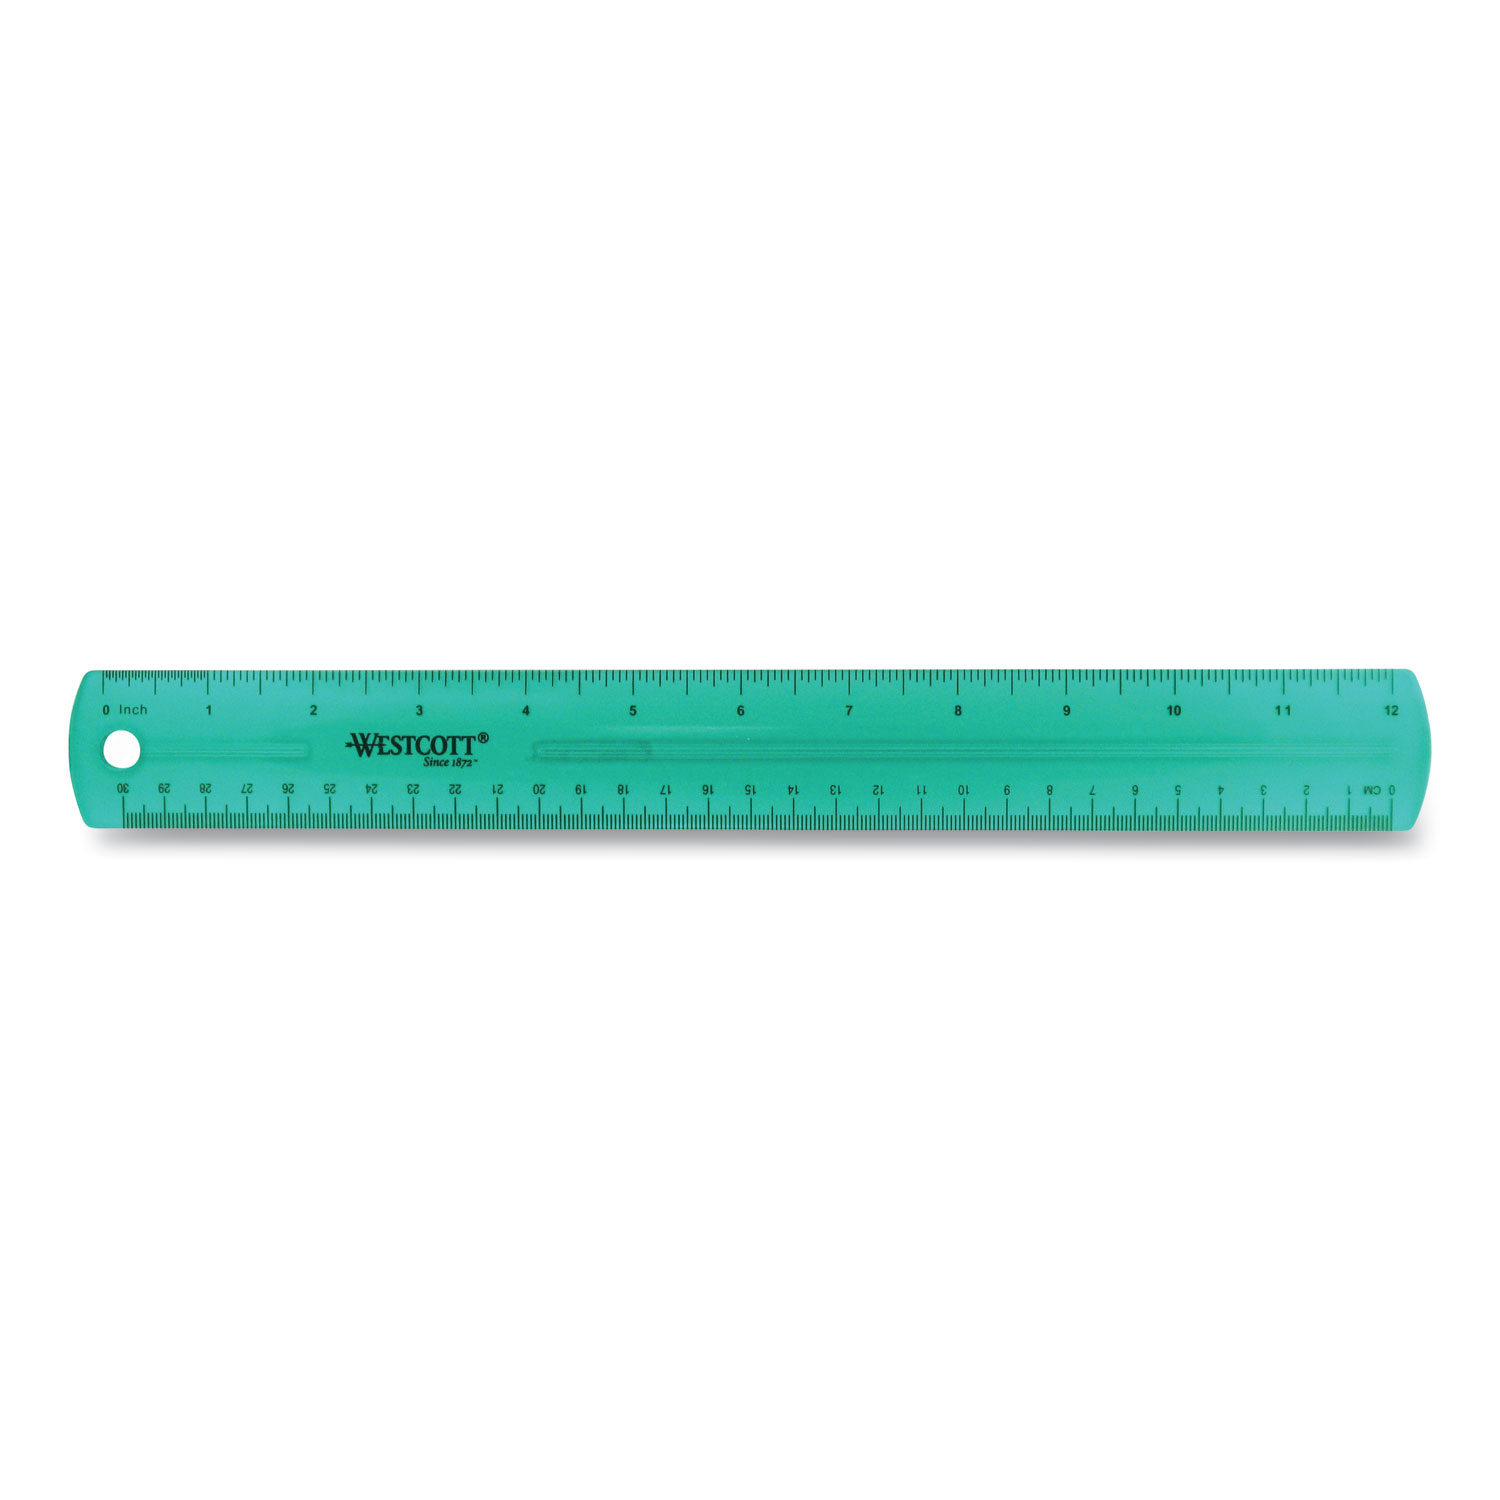 1" 1/2” 1/4” 1/“8 1/16" Colored Vintage The Master 12-Inch 5-In-1 Plastic Ruler 